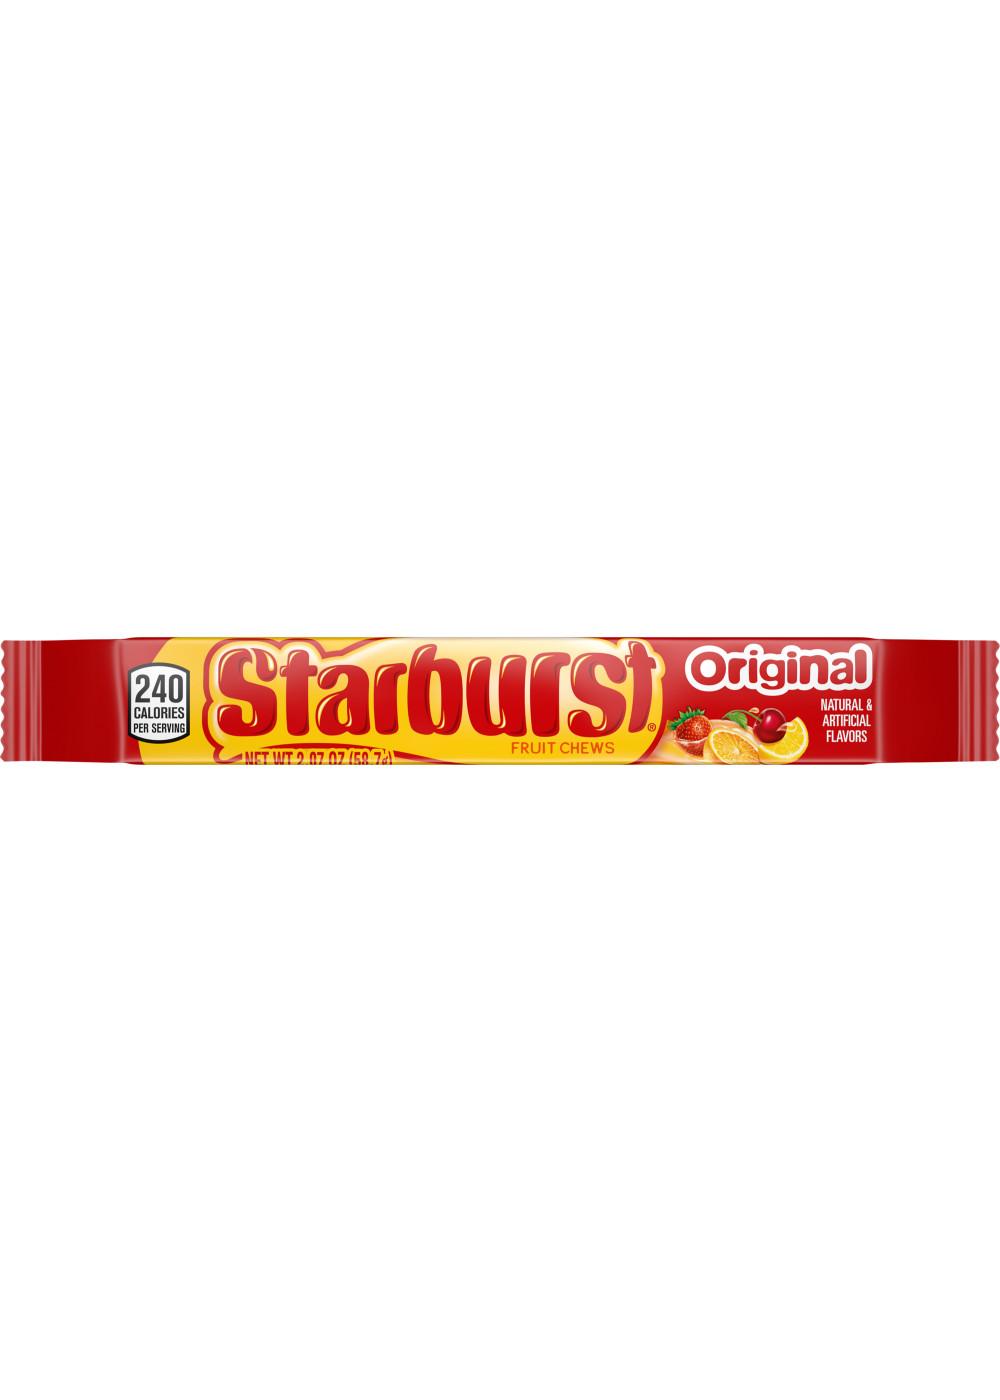 Starburst Original Fruit Chews Chewy Candy; image 1 of 2